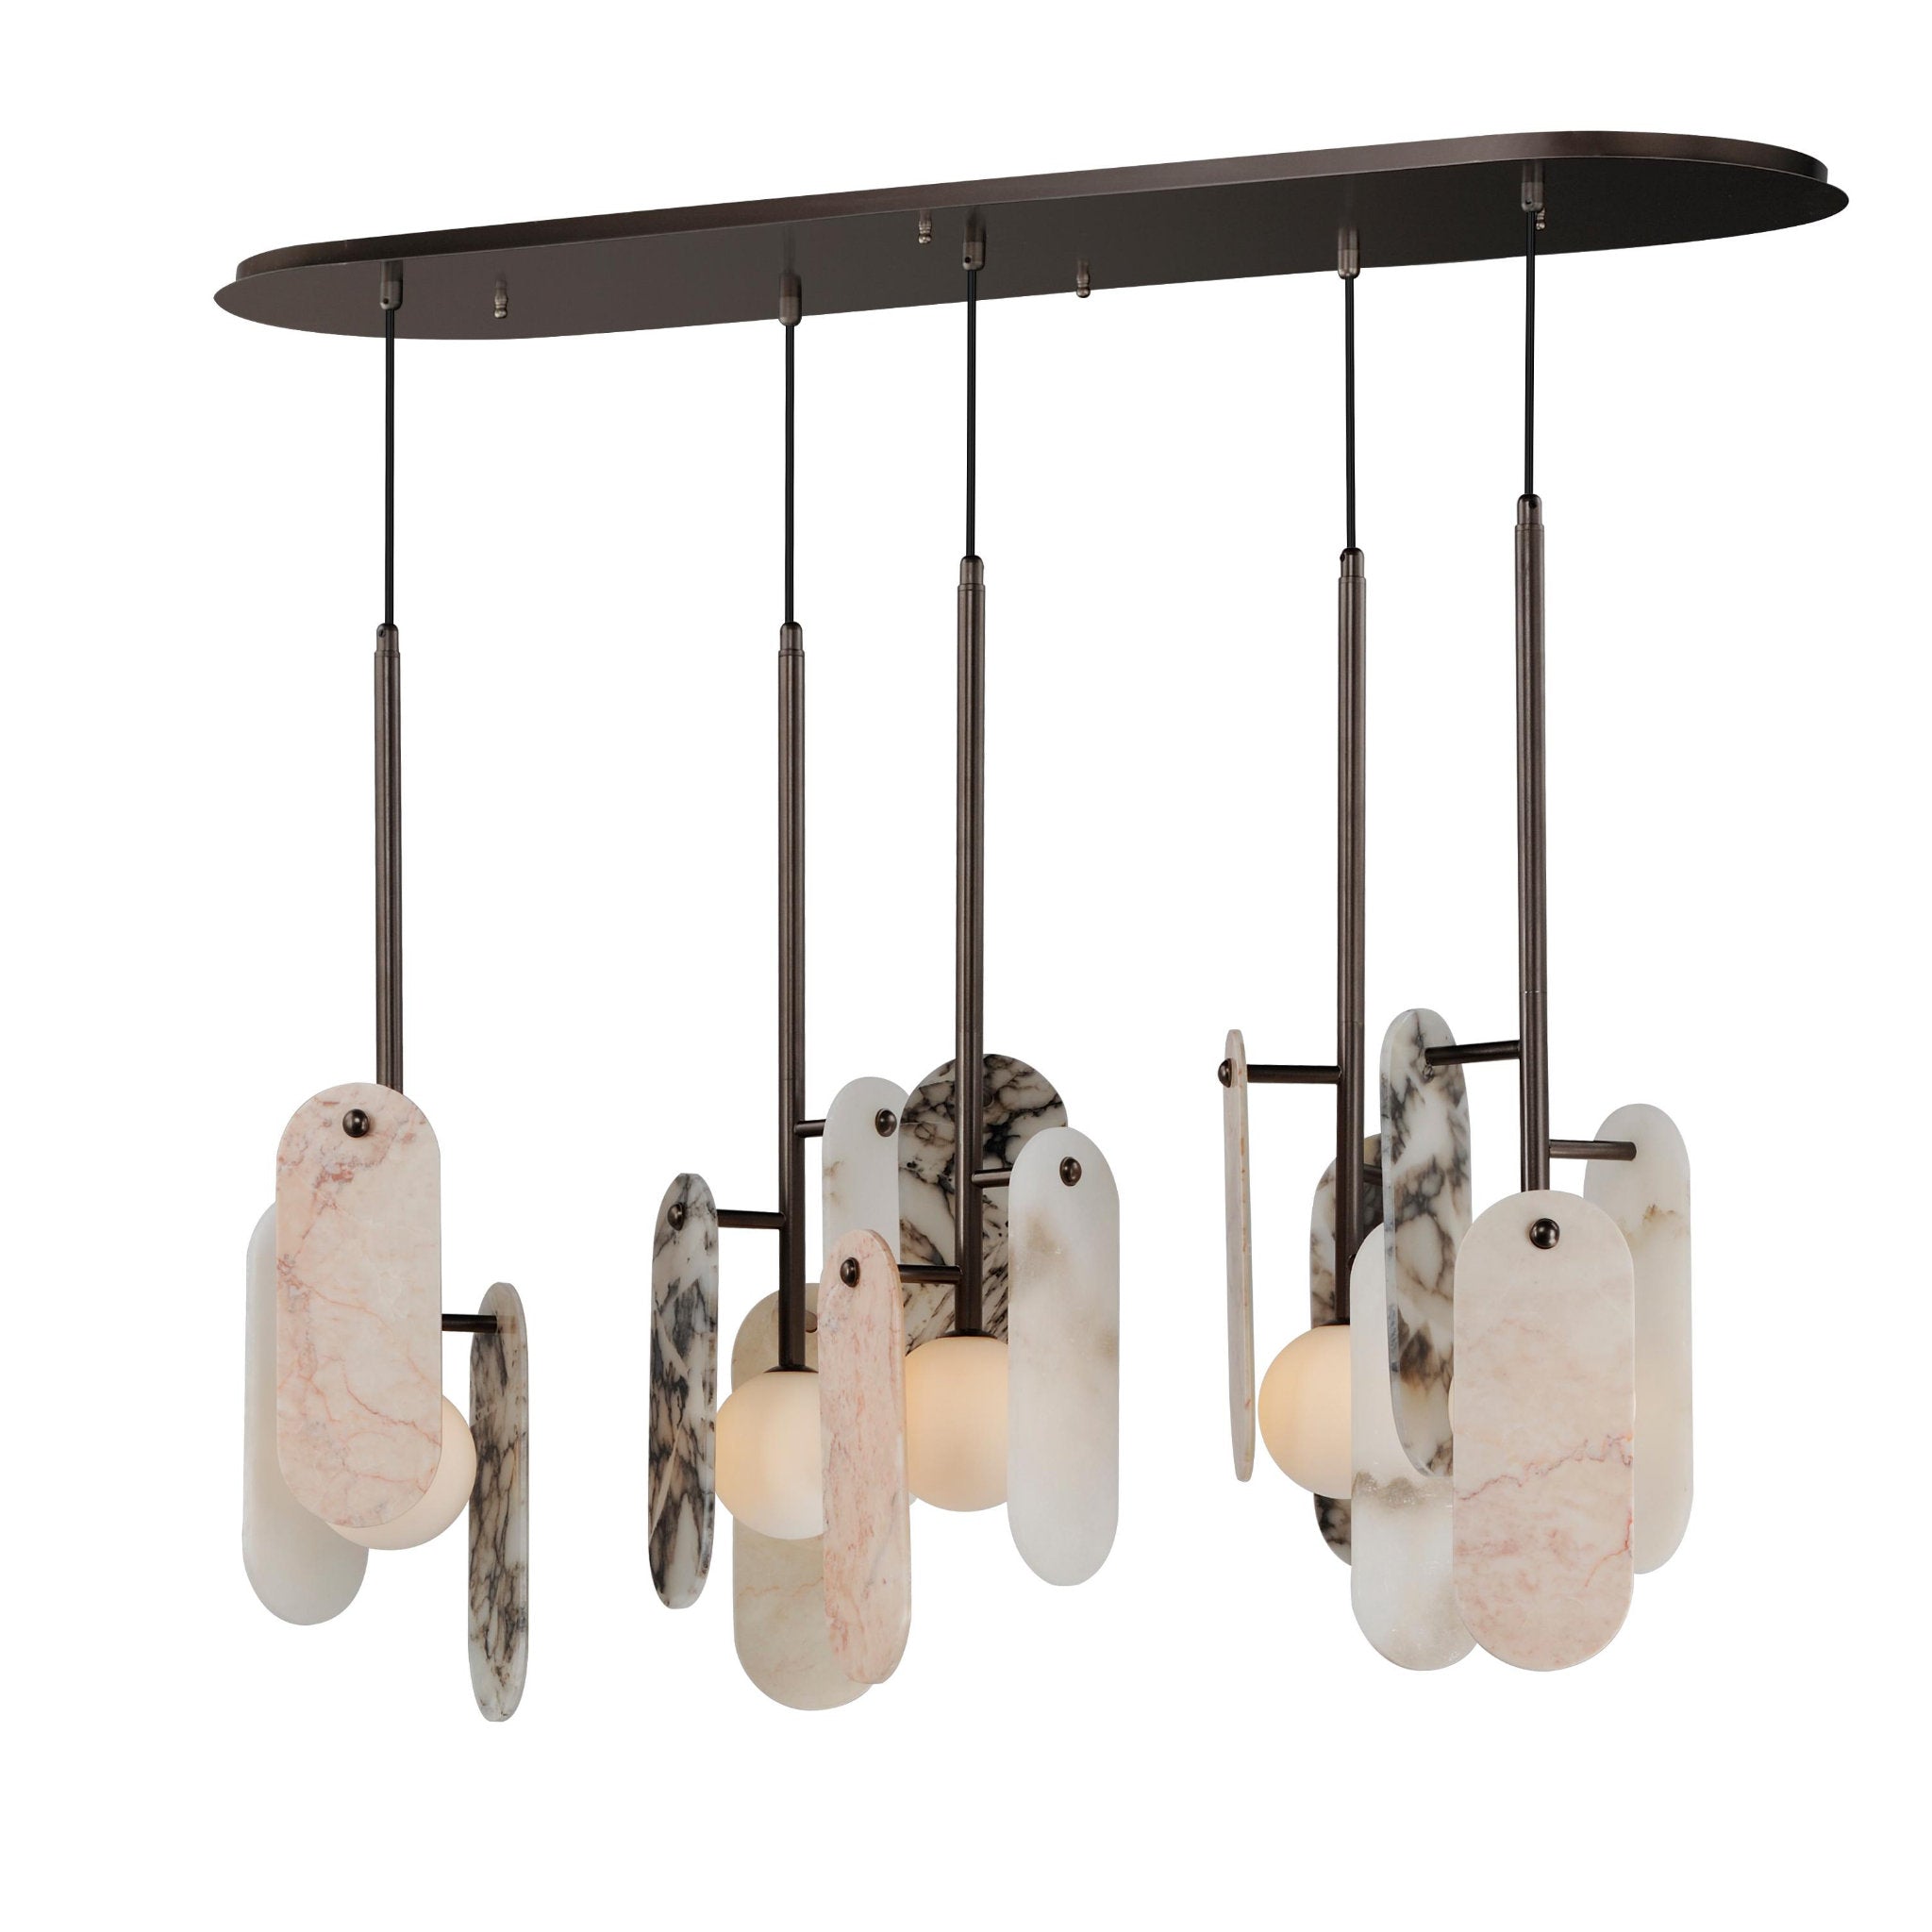 Studio M SM24815VSBBZ Megalith 5-Light Pendant Various Stone in Brushed Bronze by Nina Magon